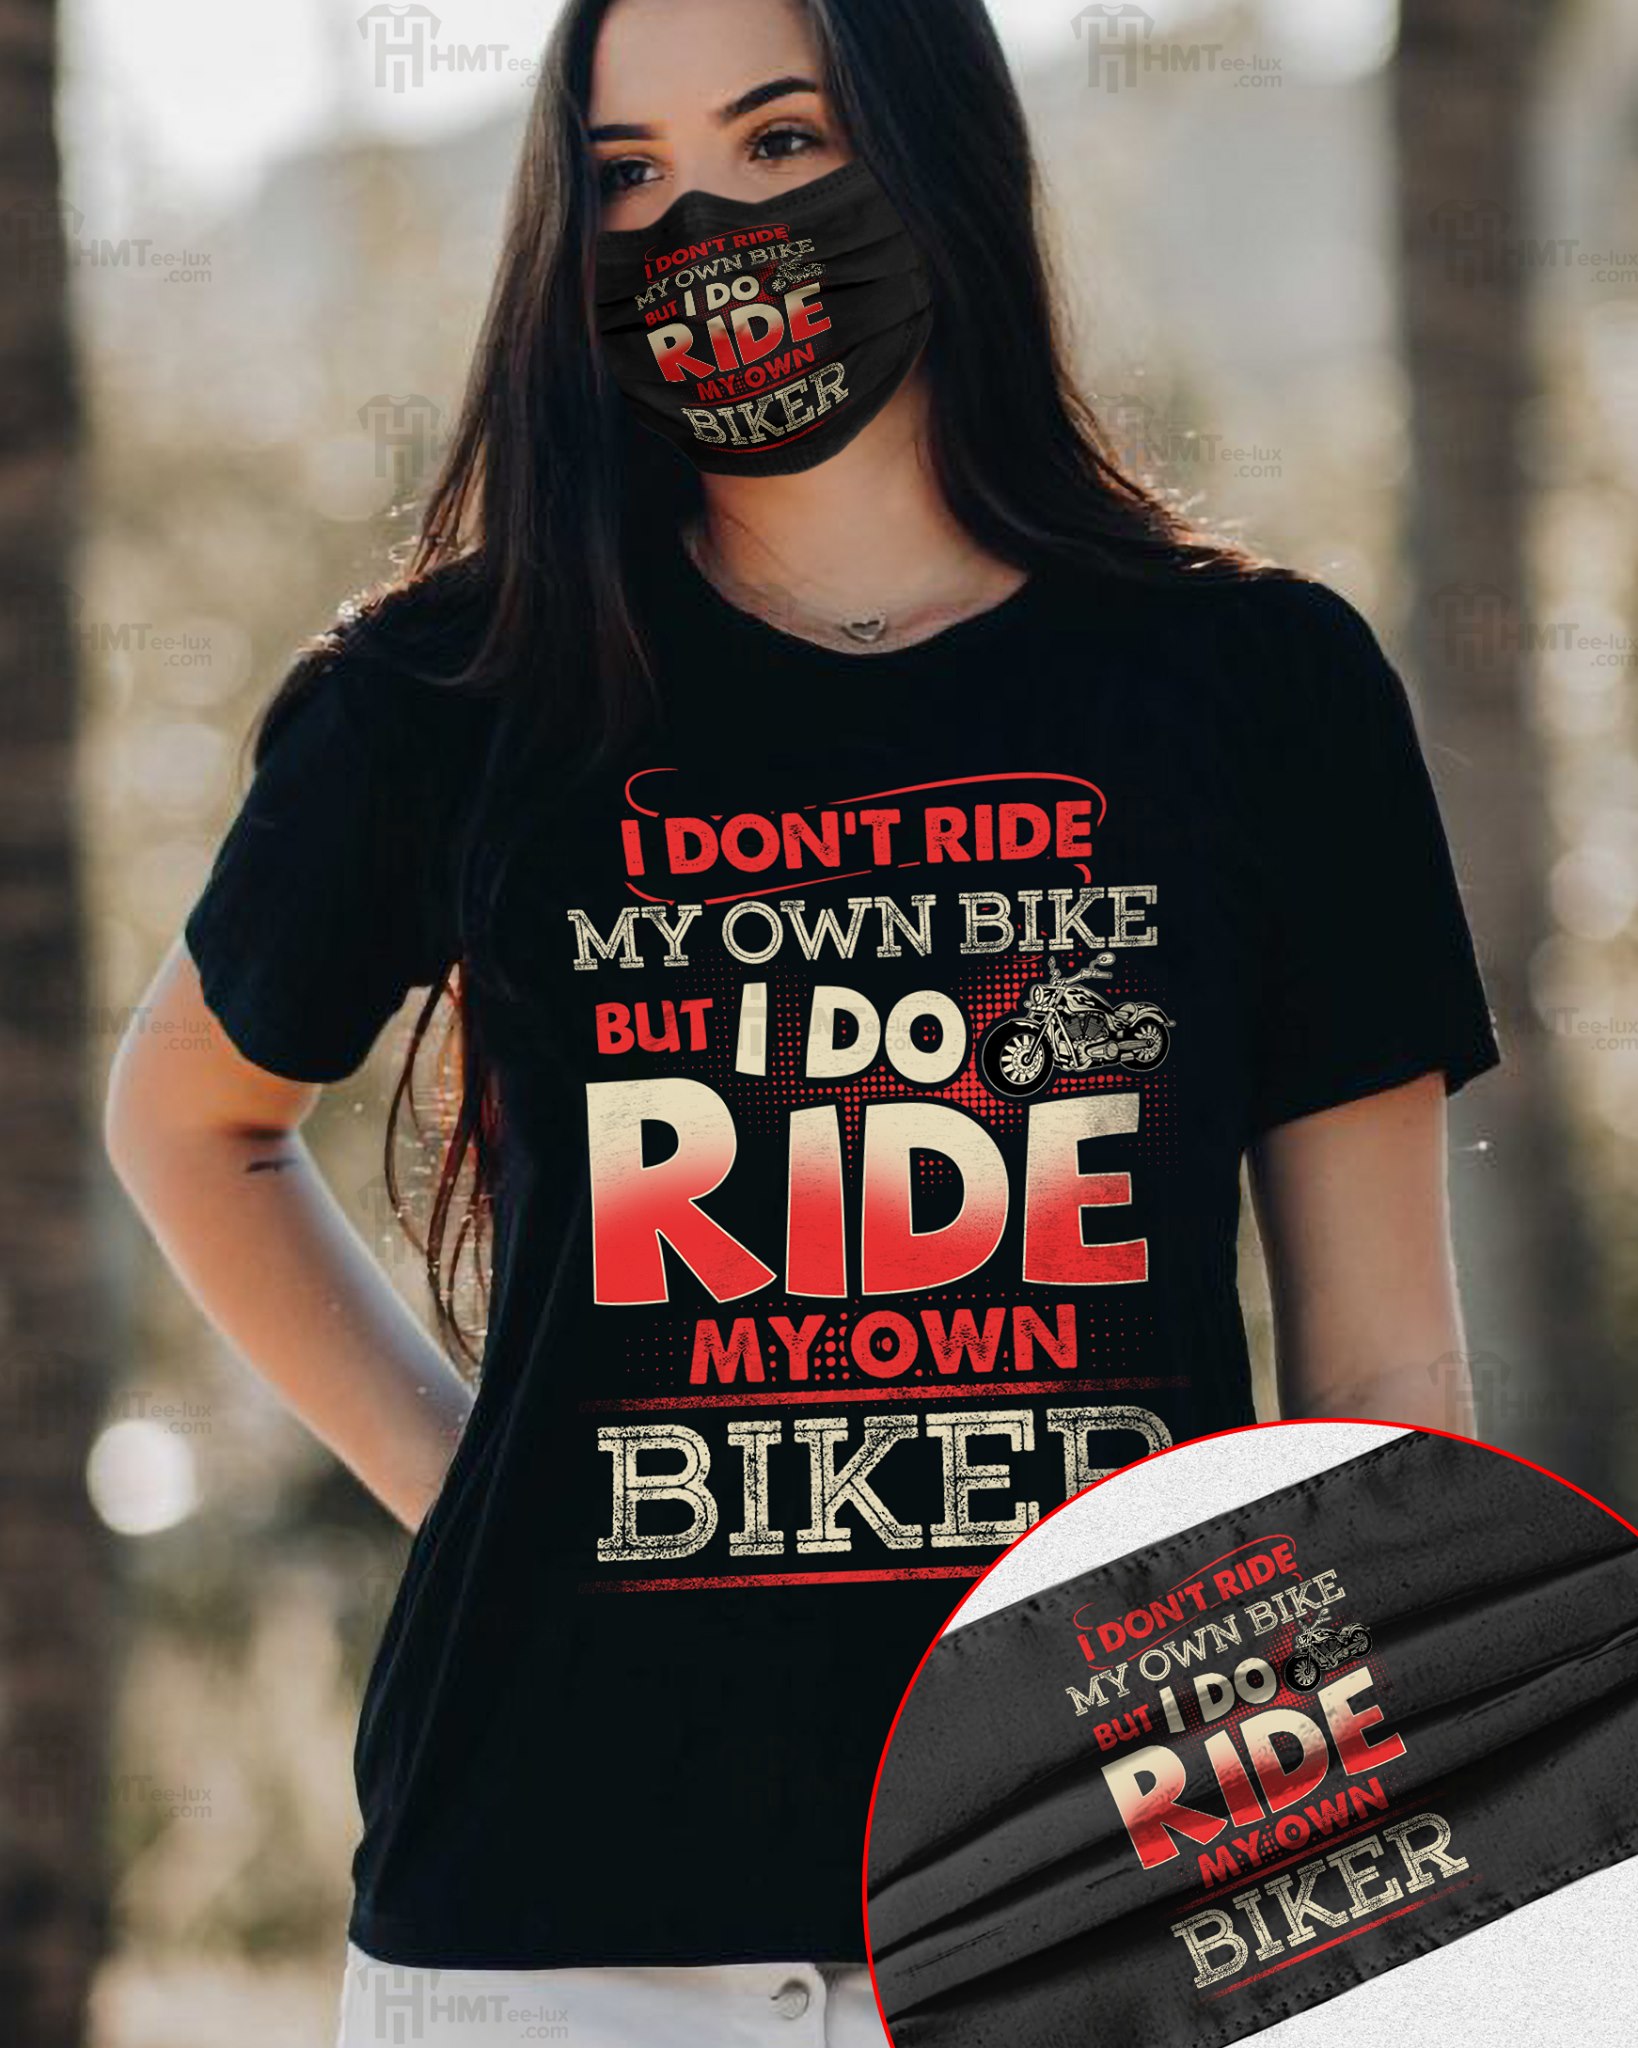 I dont ride my own bike but I do ride my own biked